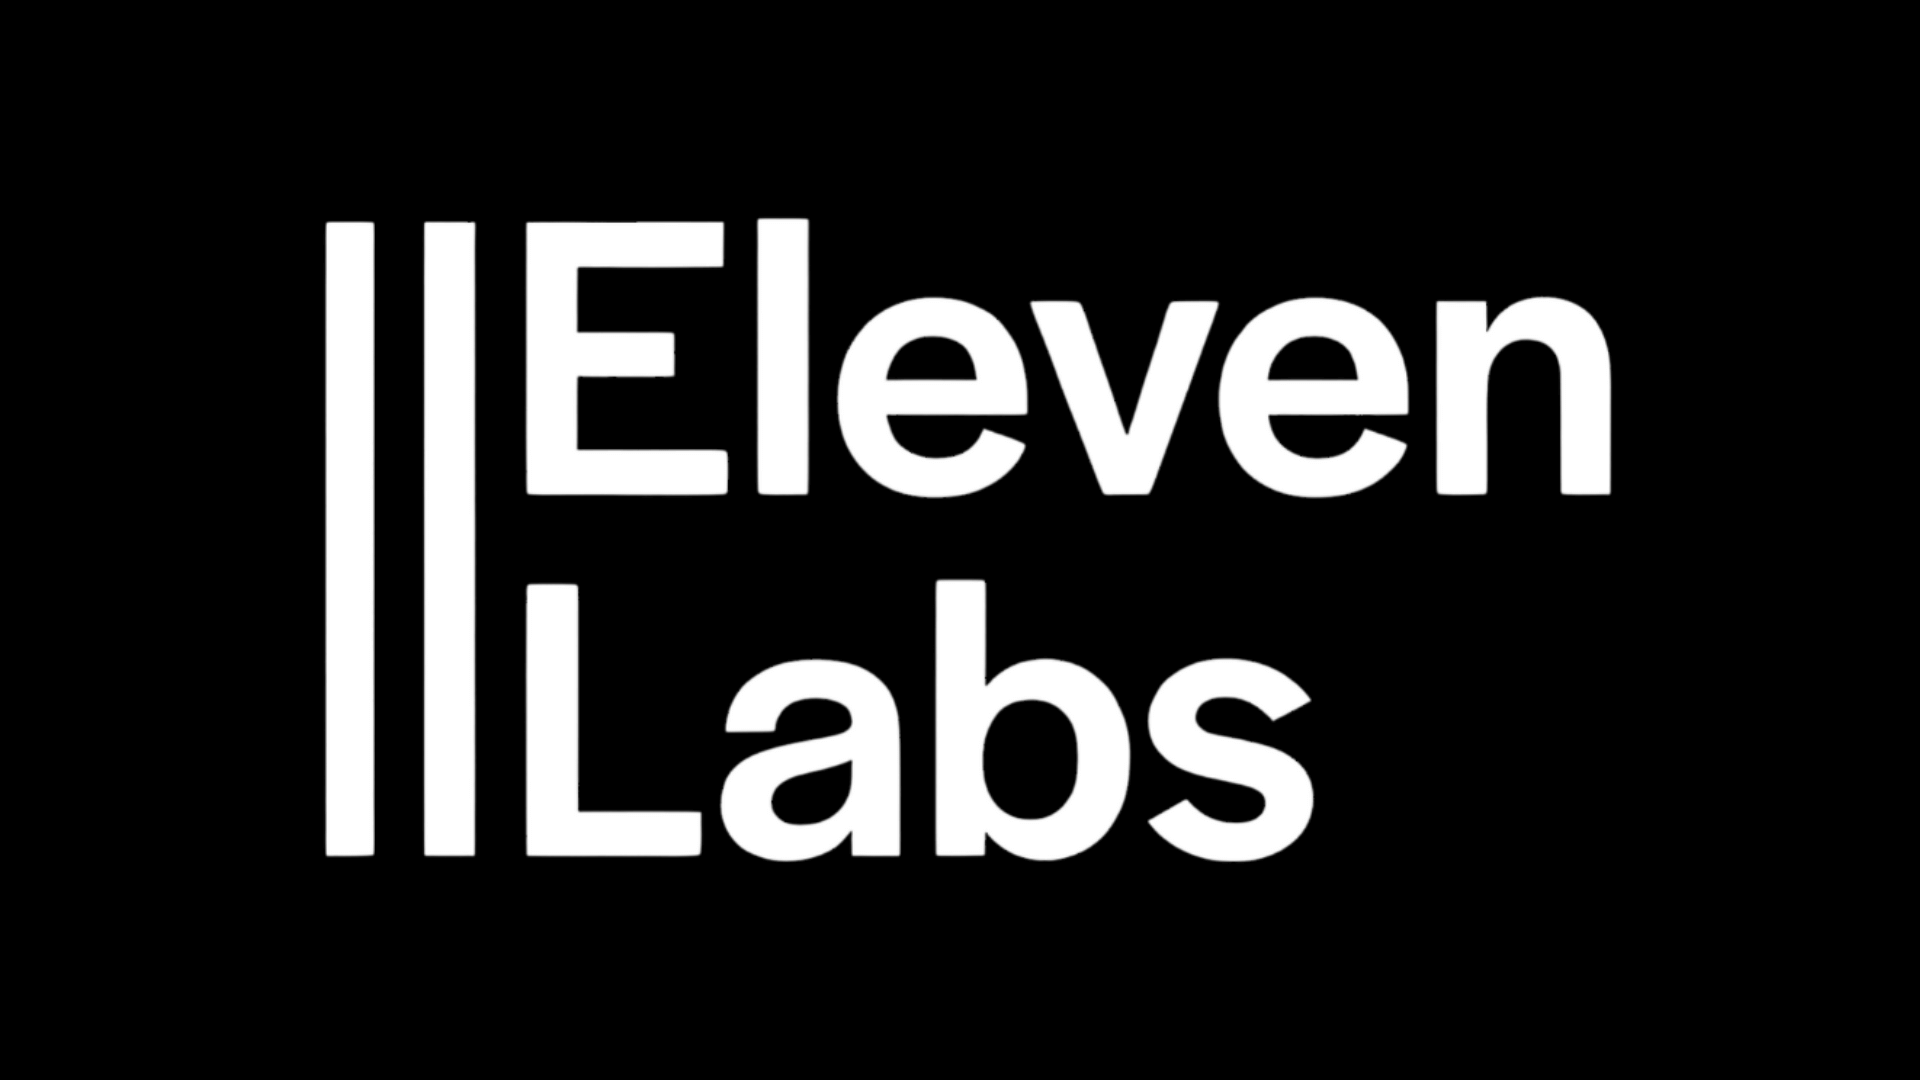 ElevenLabs launched a text-to-sound effects AI audio model